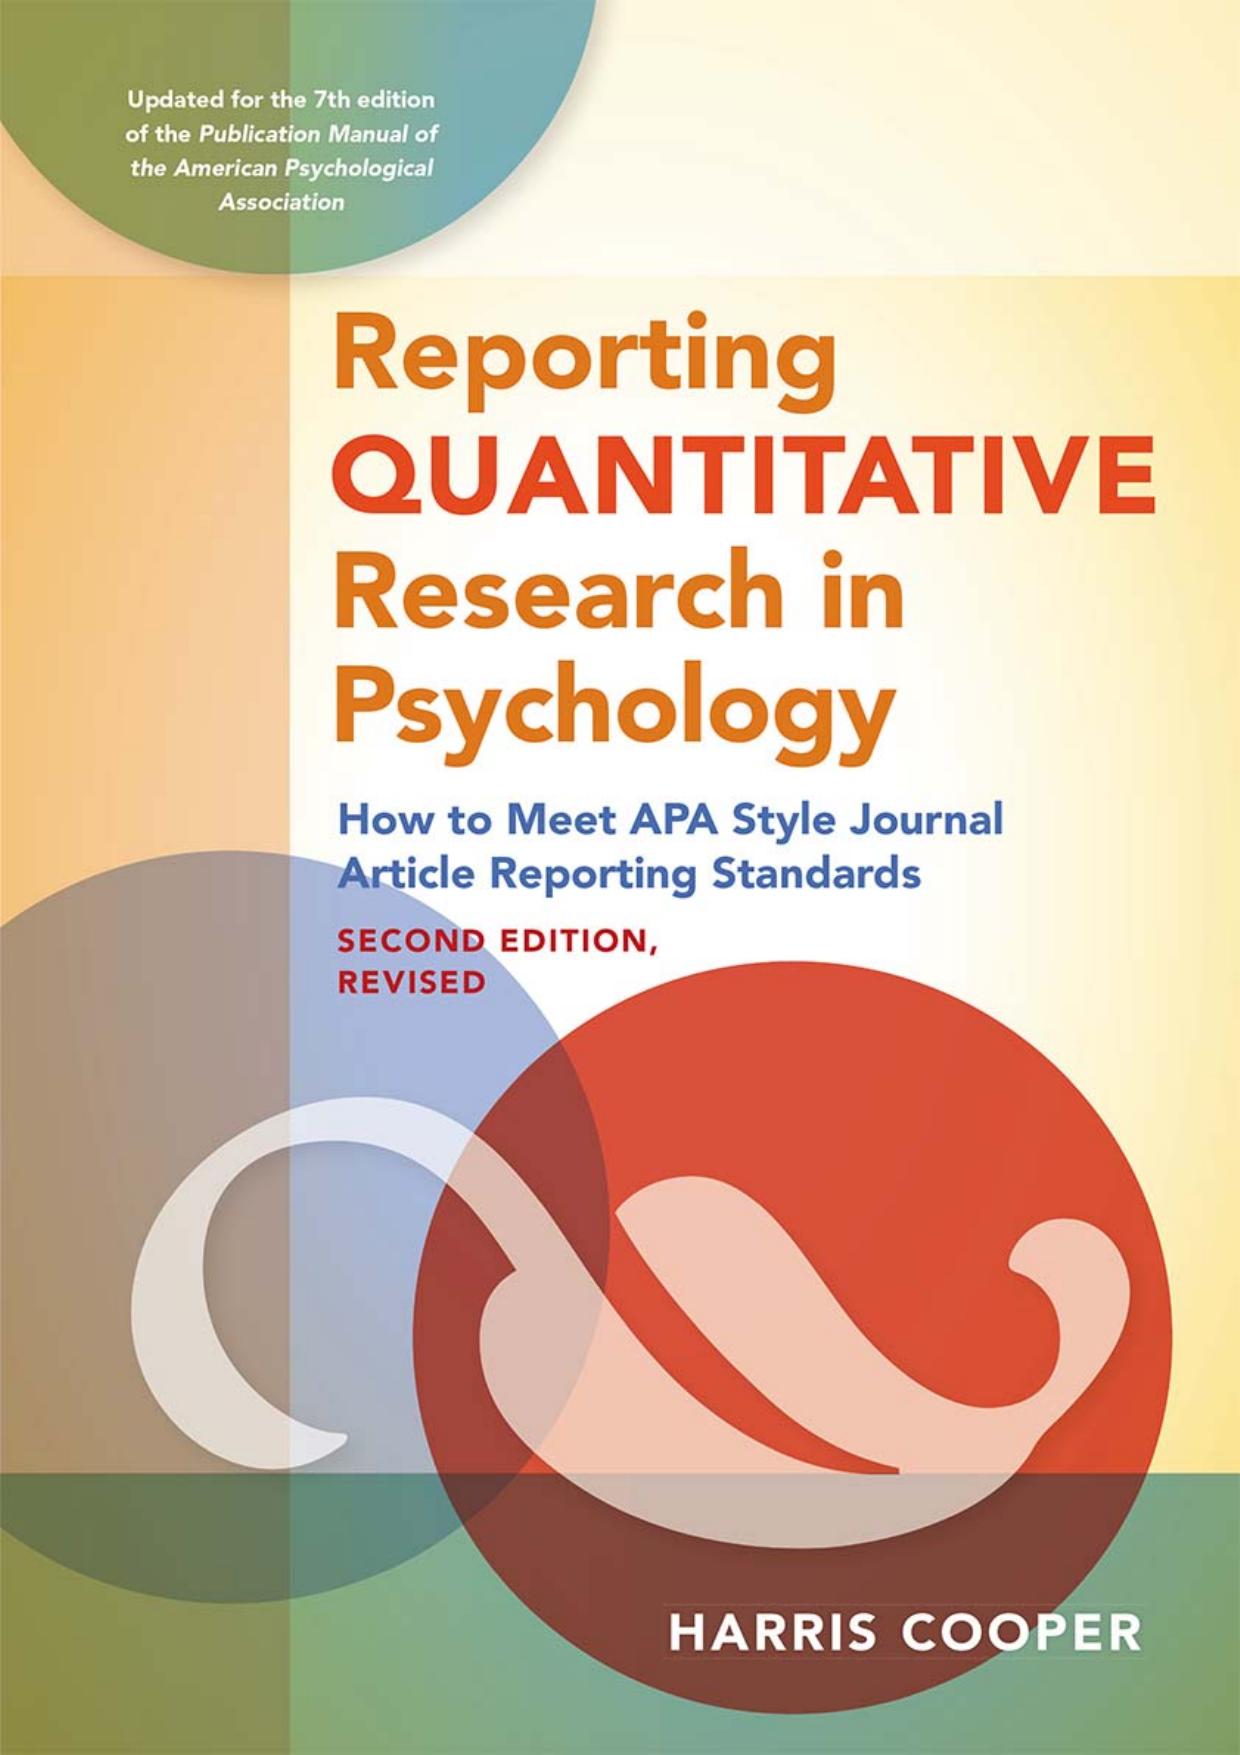 Reporting Quantitative Research in Psychology: How to Meet APA Style Journal Article Reporting Standards, Second Edition, Revised, 2020 Copyright Second Edition -  by Harris M. Cooper